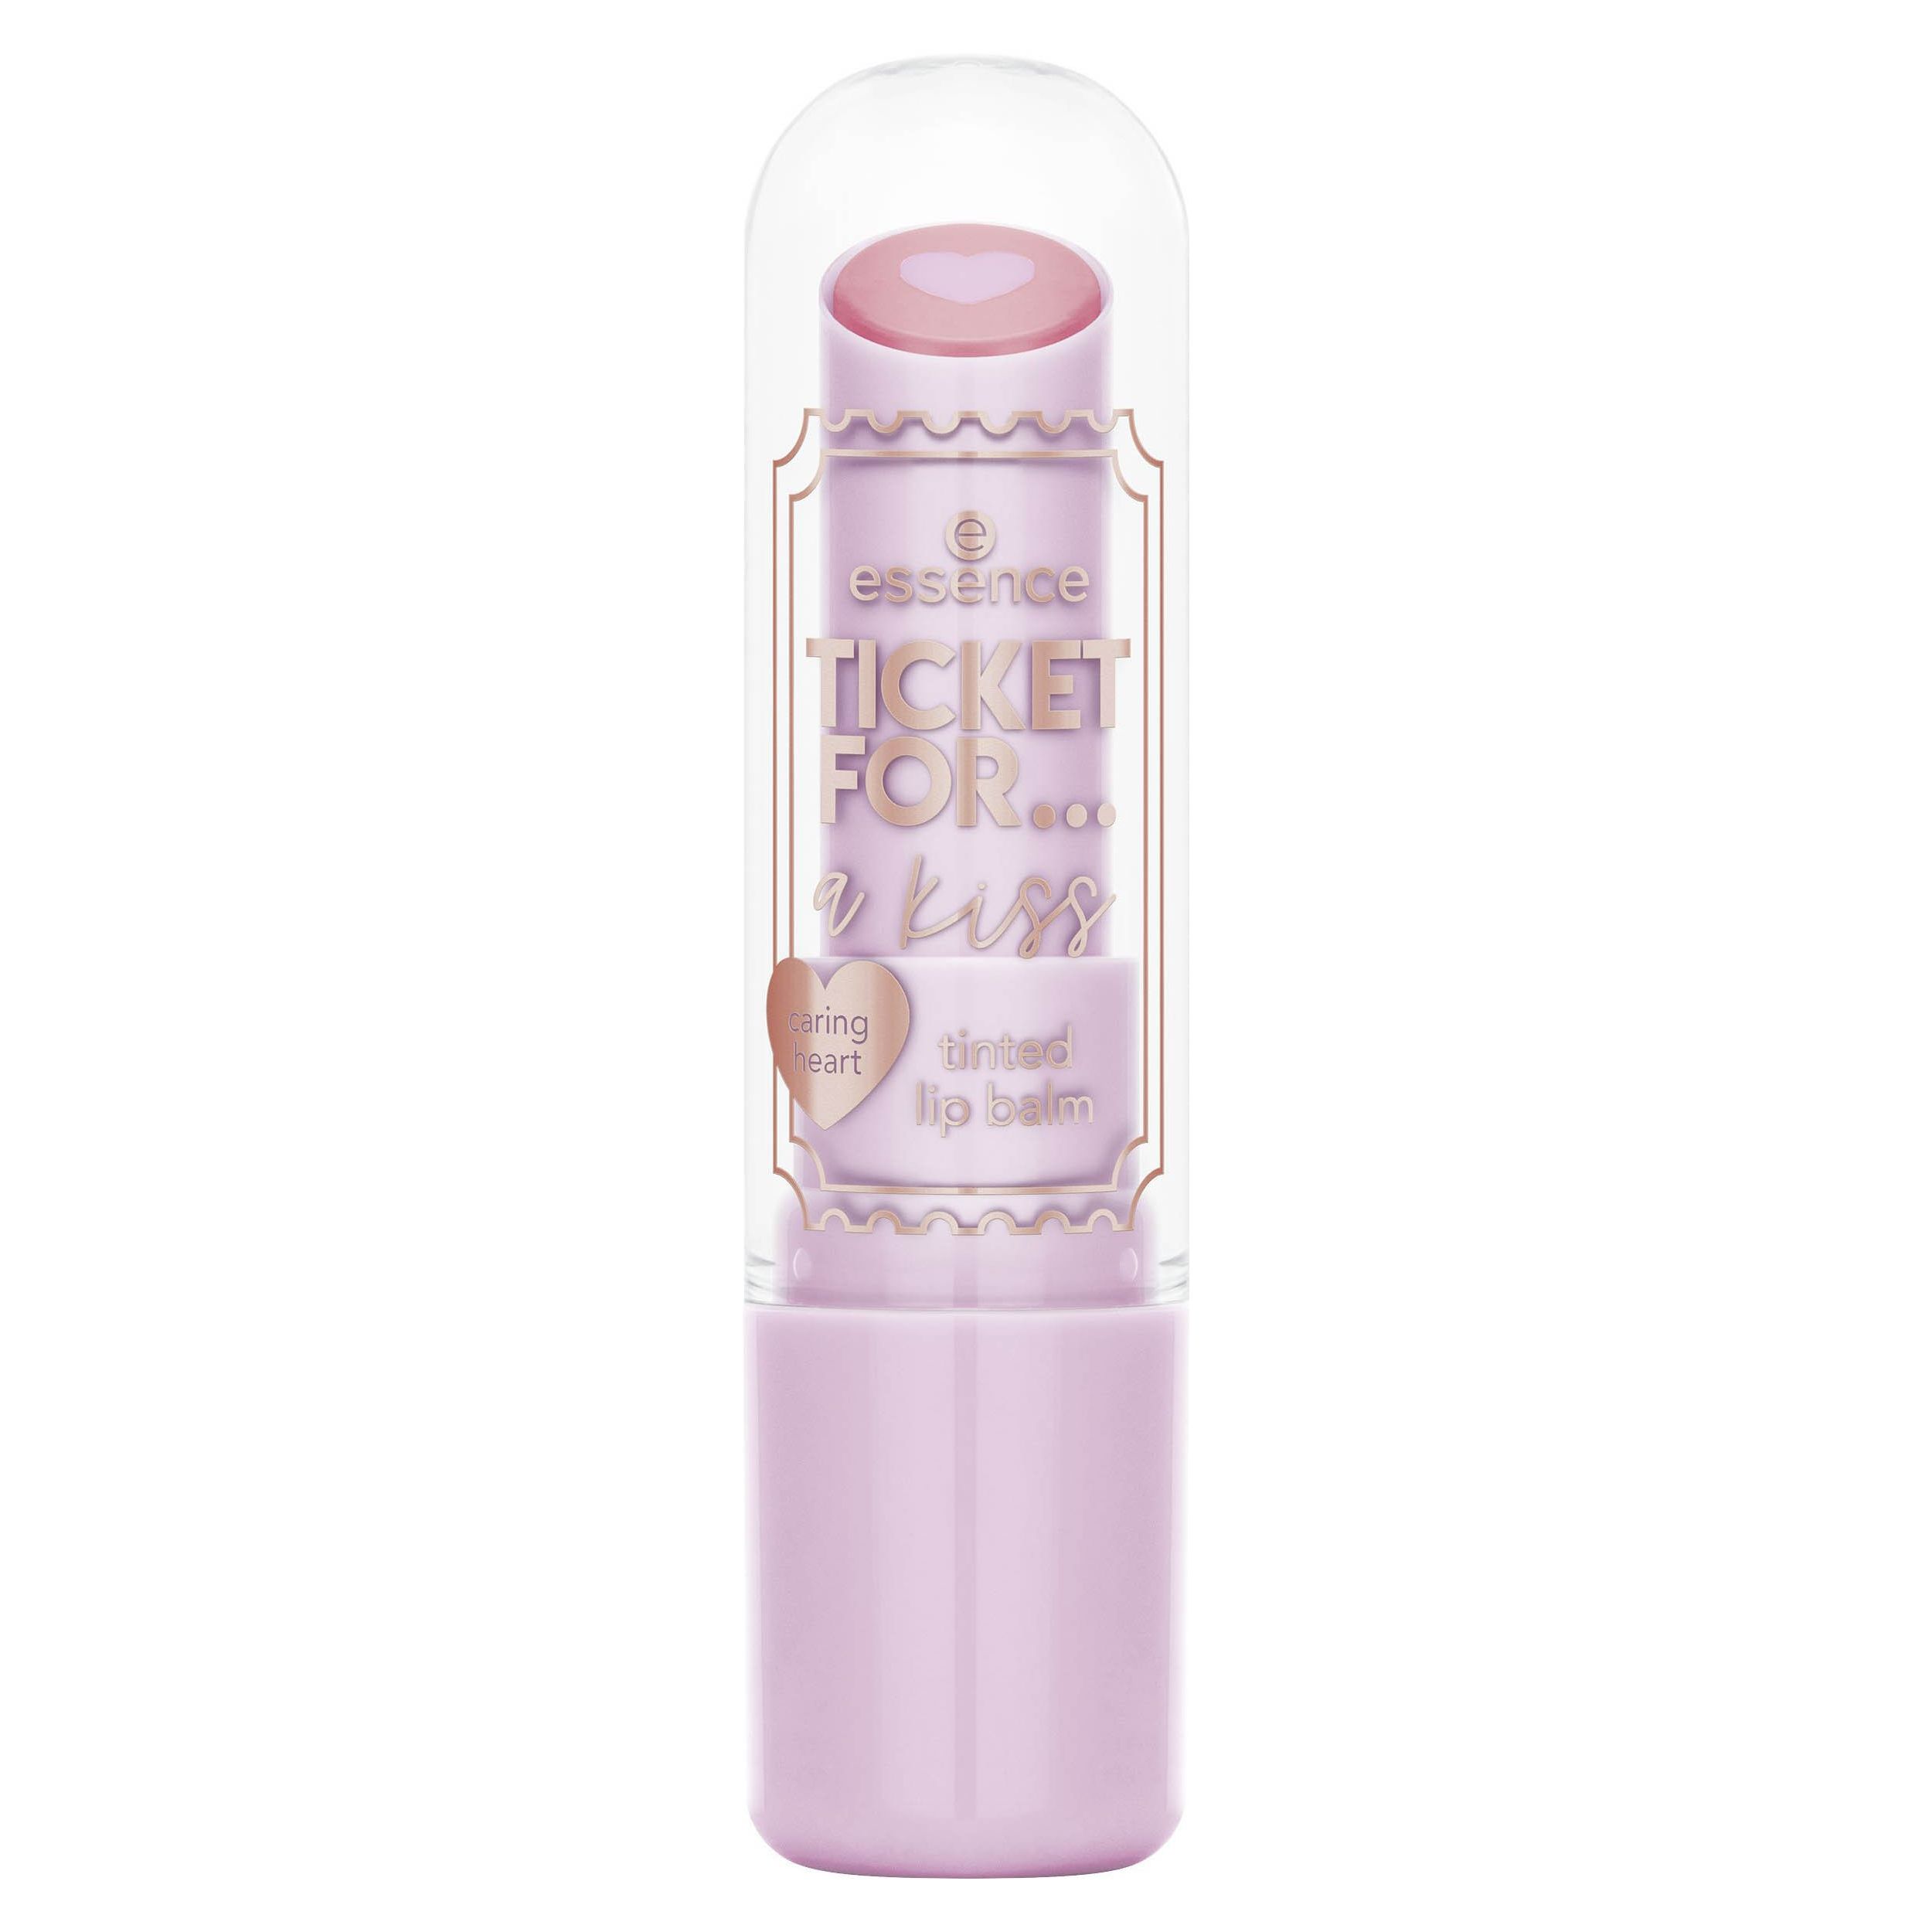 Ticket For... A Kiss - Tinted Lip Balm